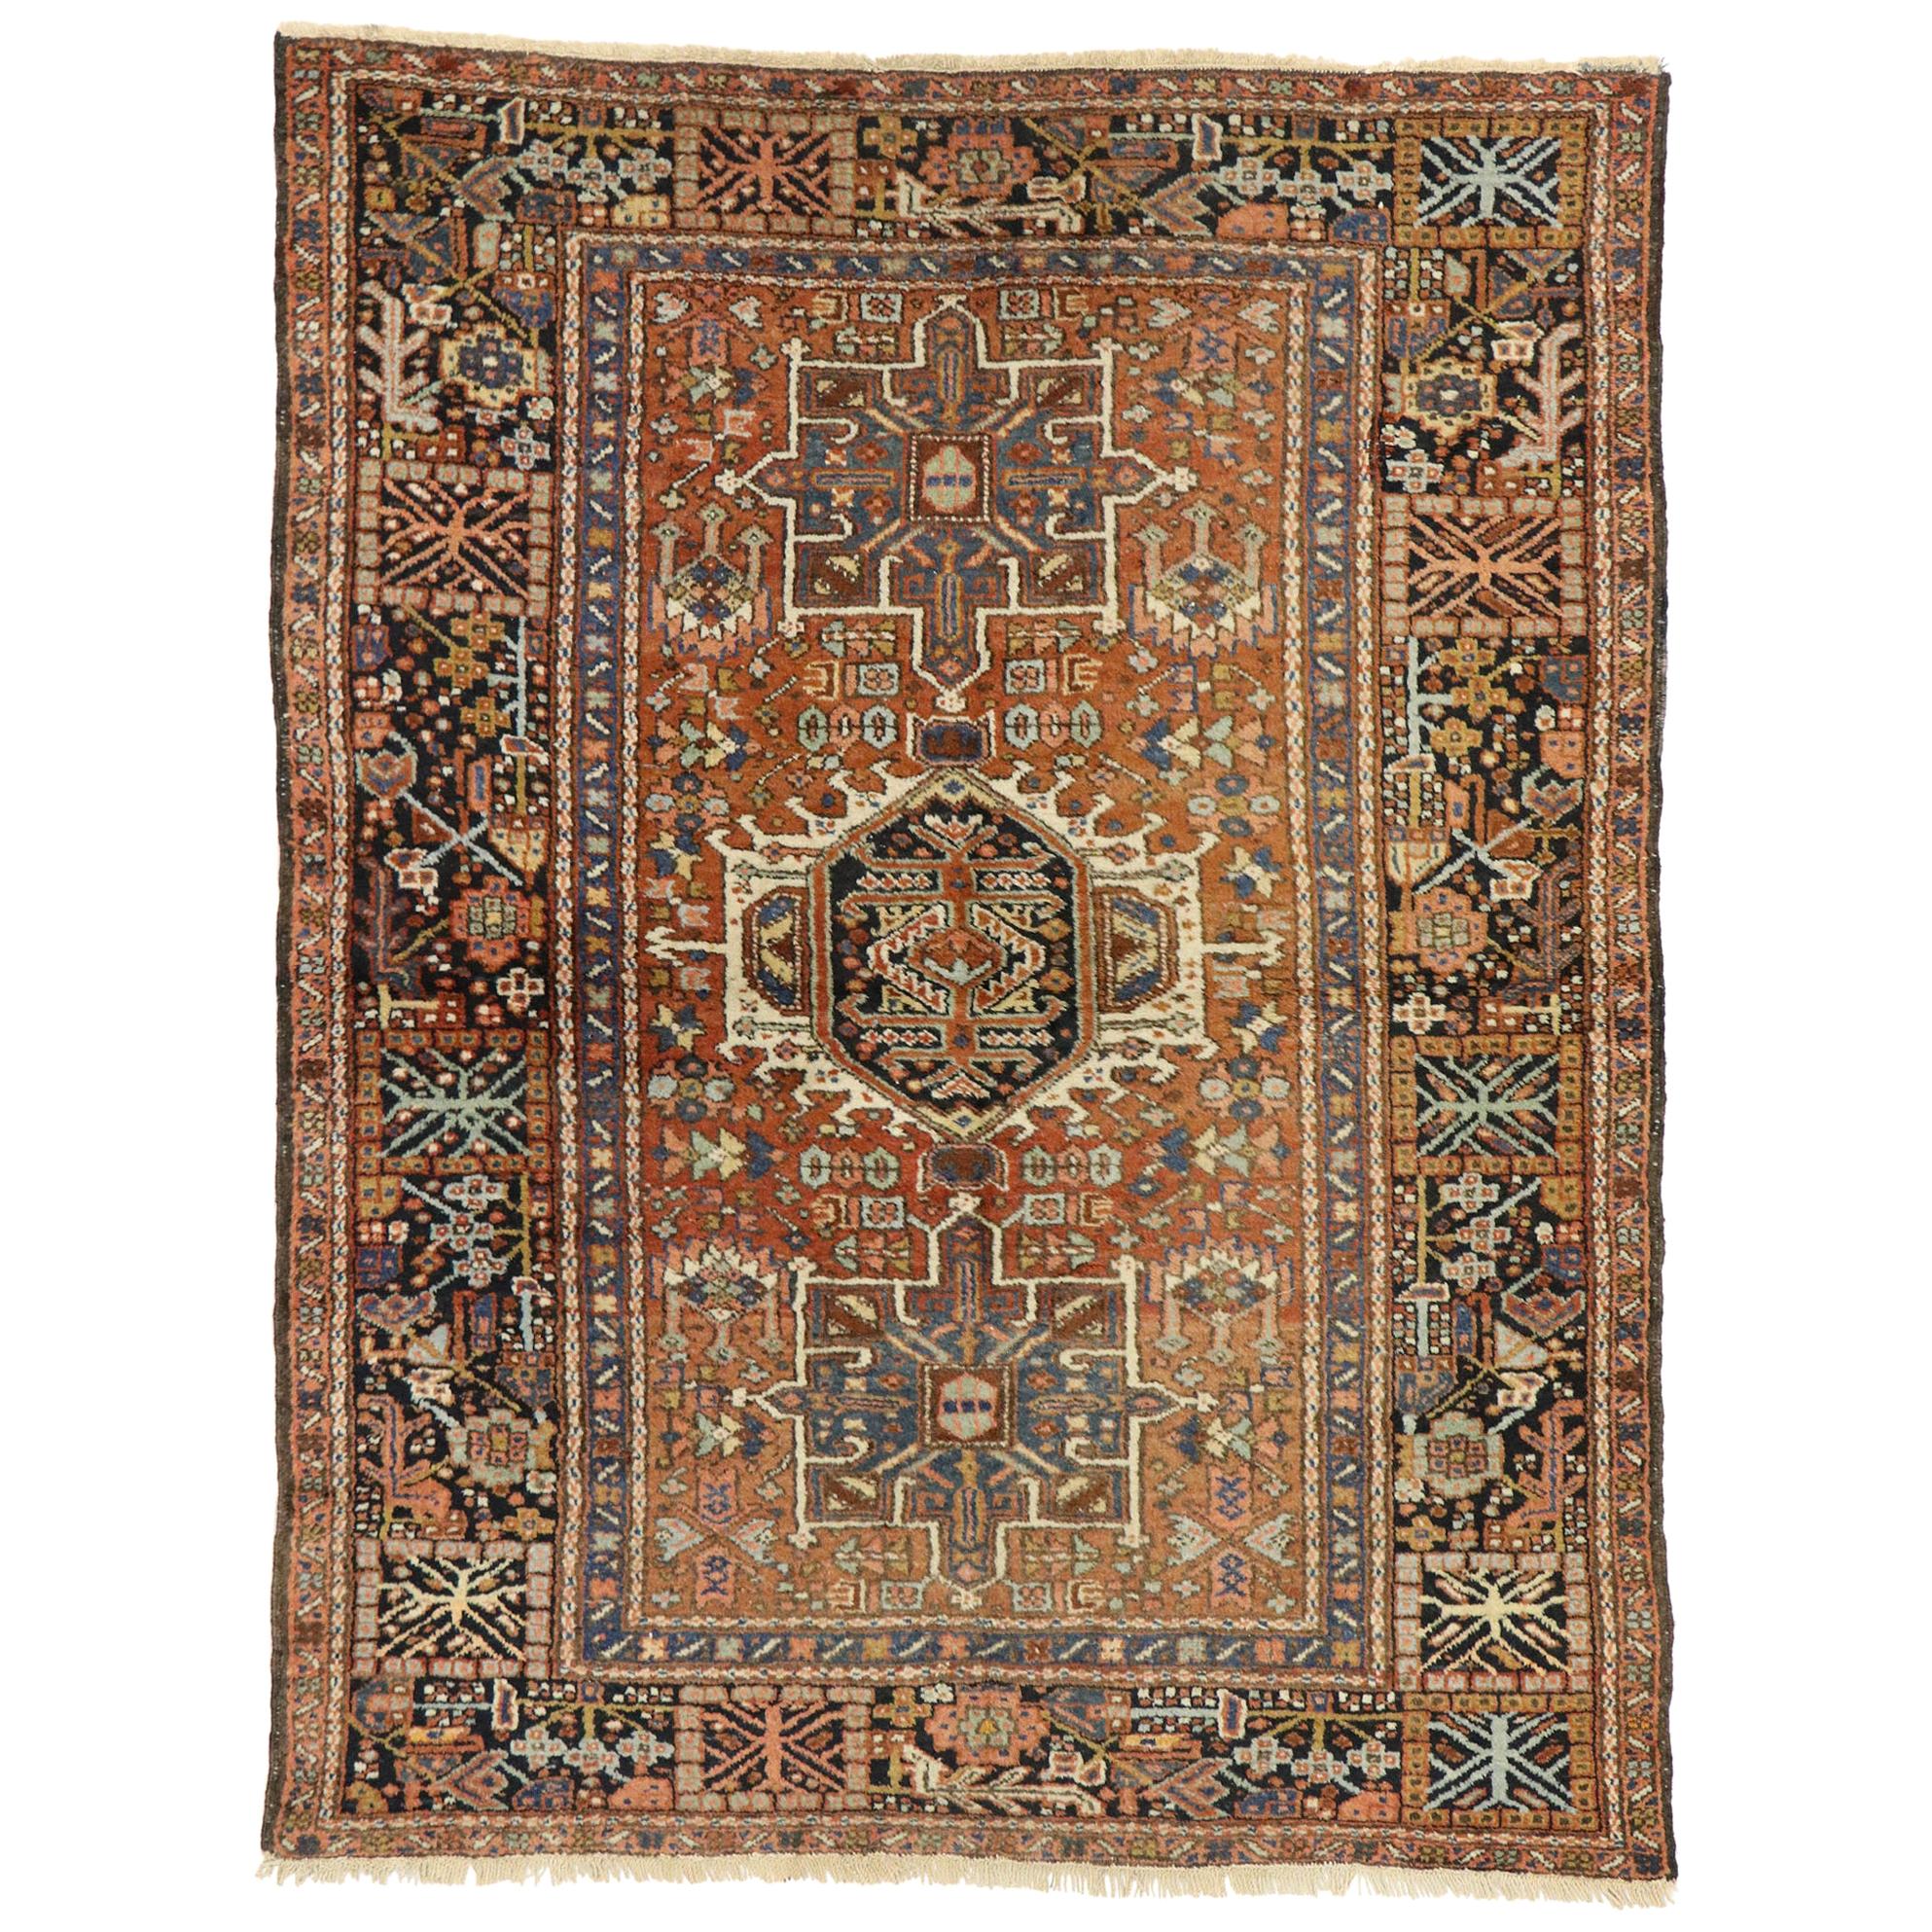 Antique Persian Karaja Heriz Rug with Tribal Style, Study or Home Office Rug